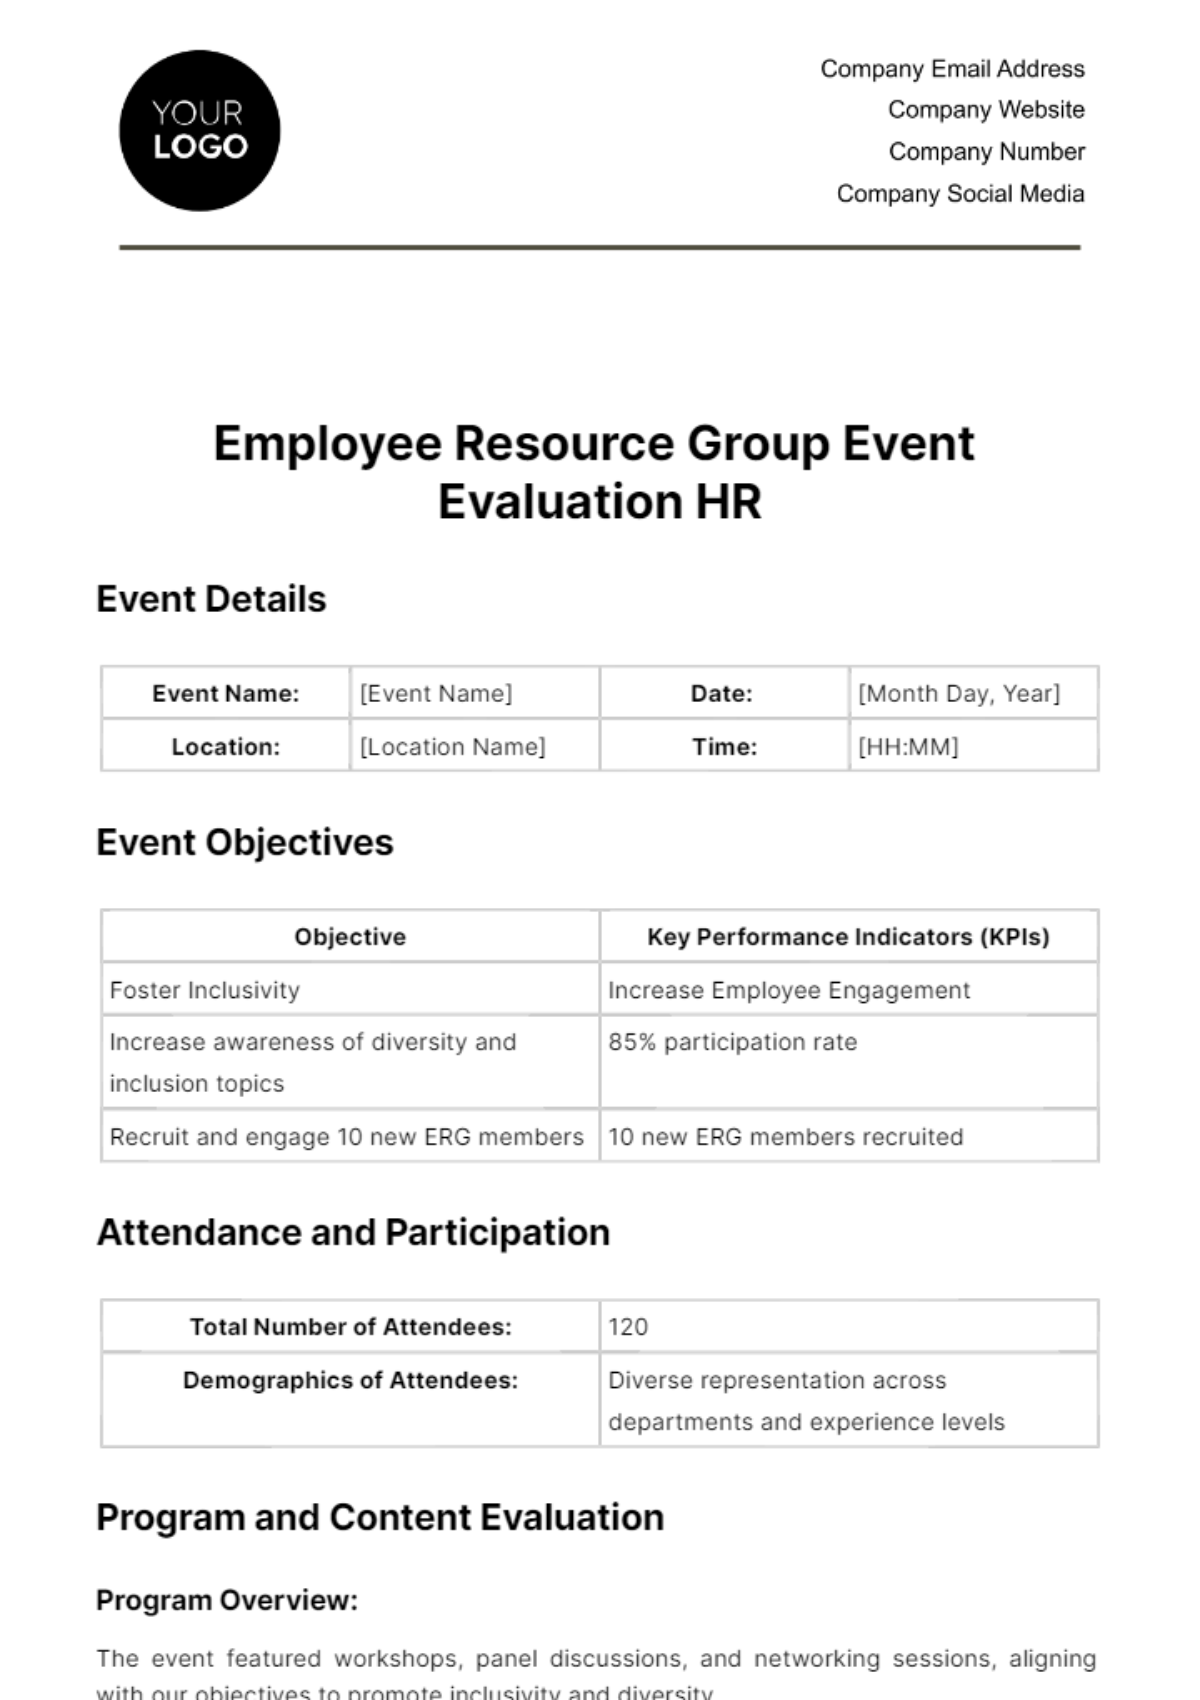 Free Employee Resource Group Event Evaluation HR Template